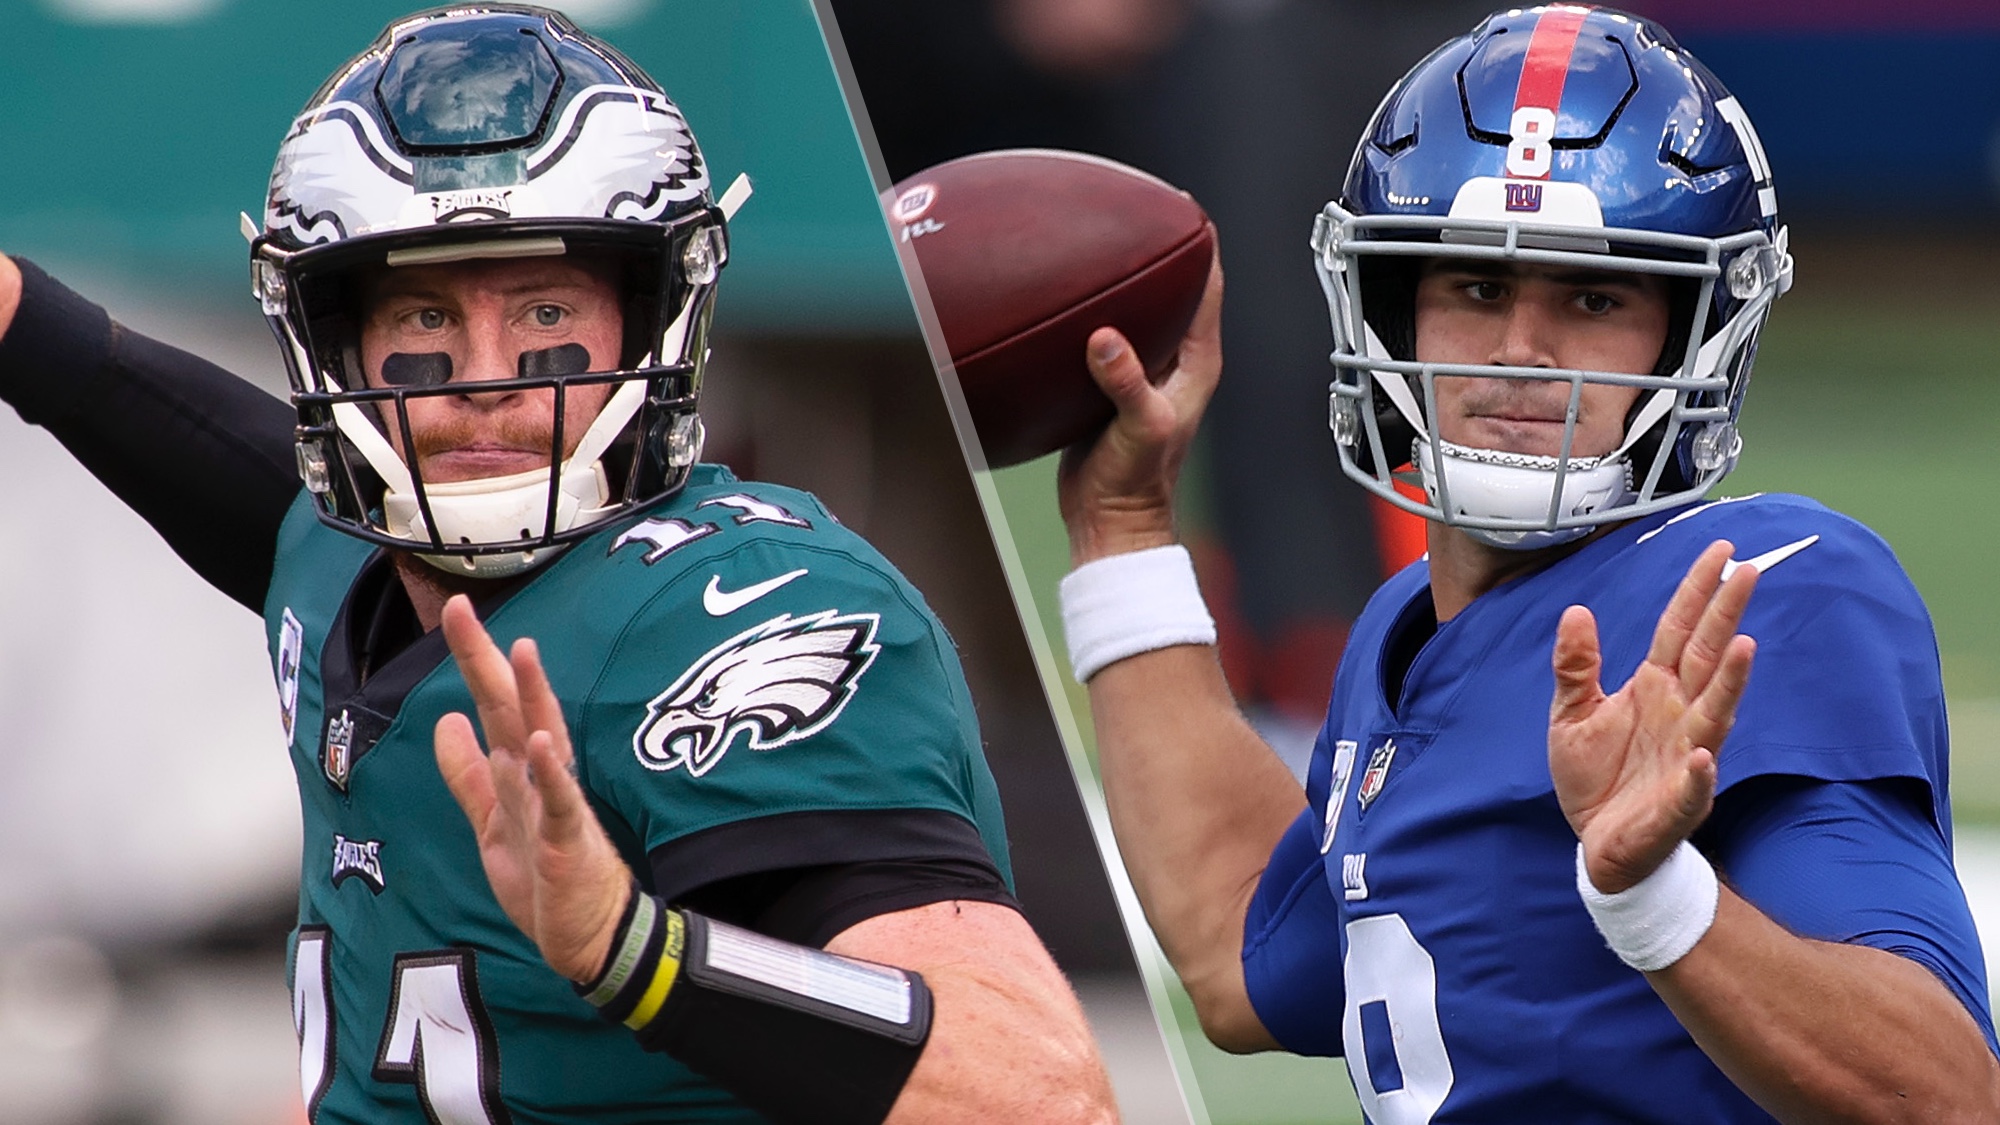 Giants vs Eagles live stream: How to watch Thursday Night Football